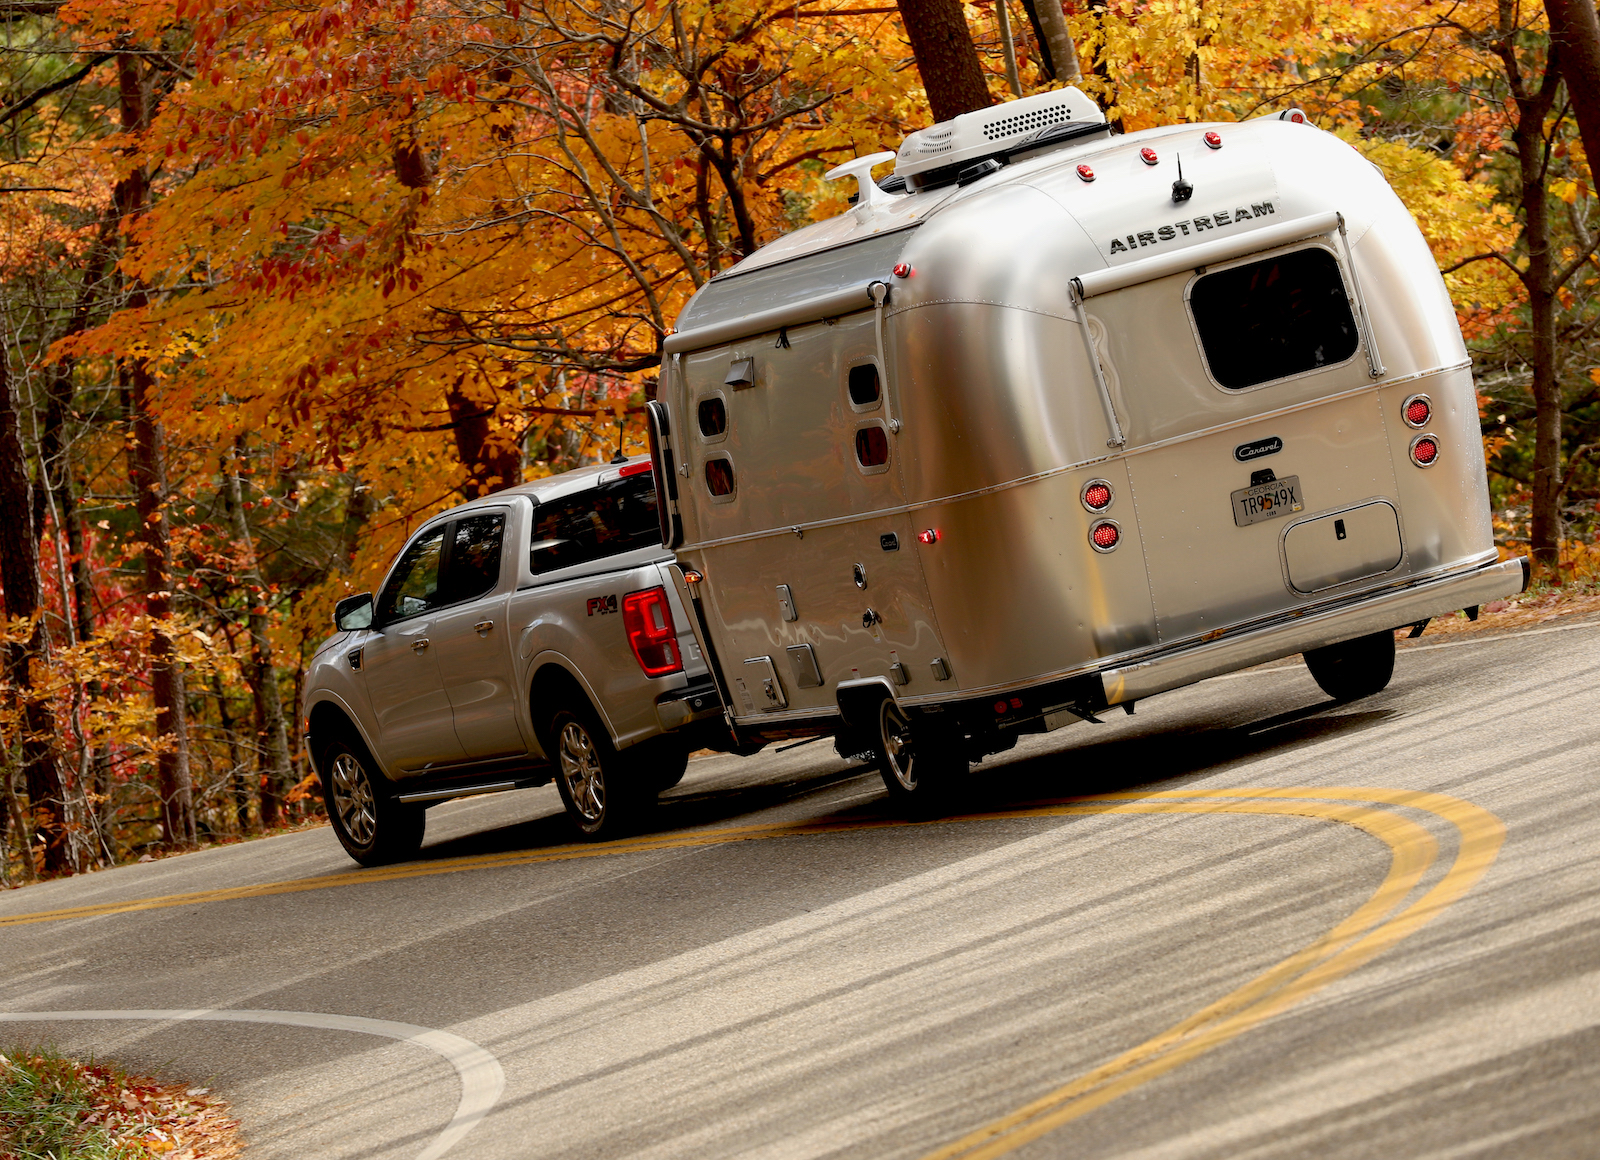 Ford Ranger Nice Fall Truck Trailer Combo Picture airstream-rear-view-tail-of-the-dragon-1600x900-